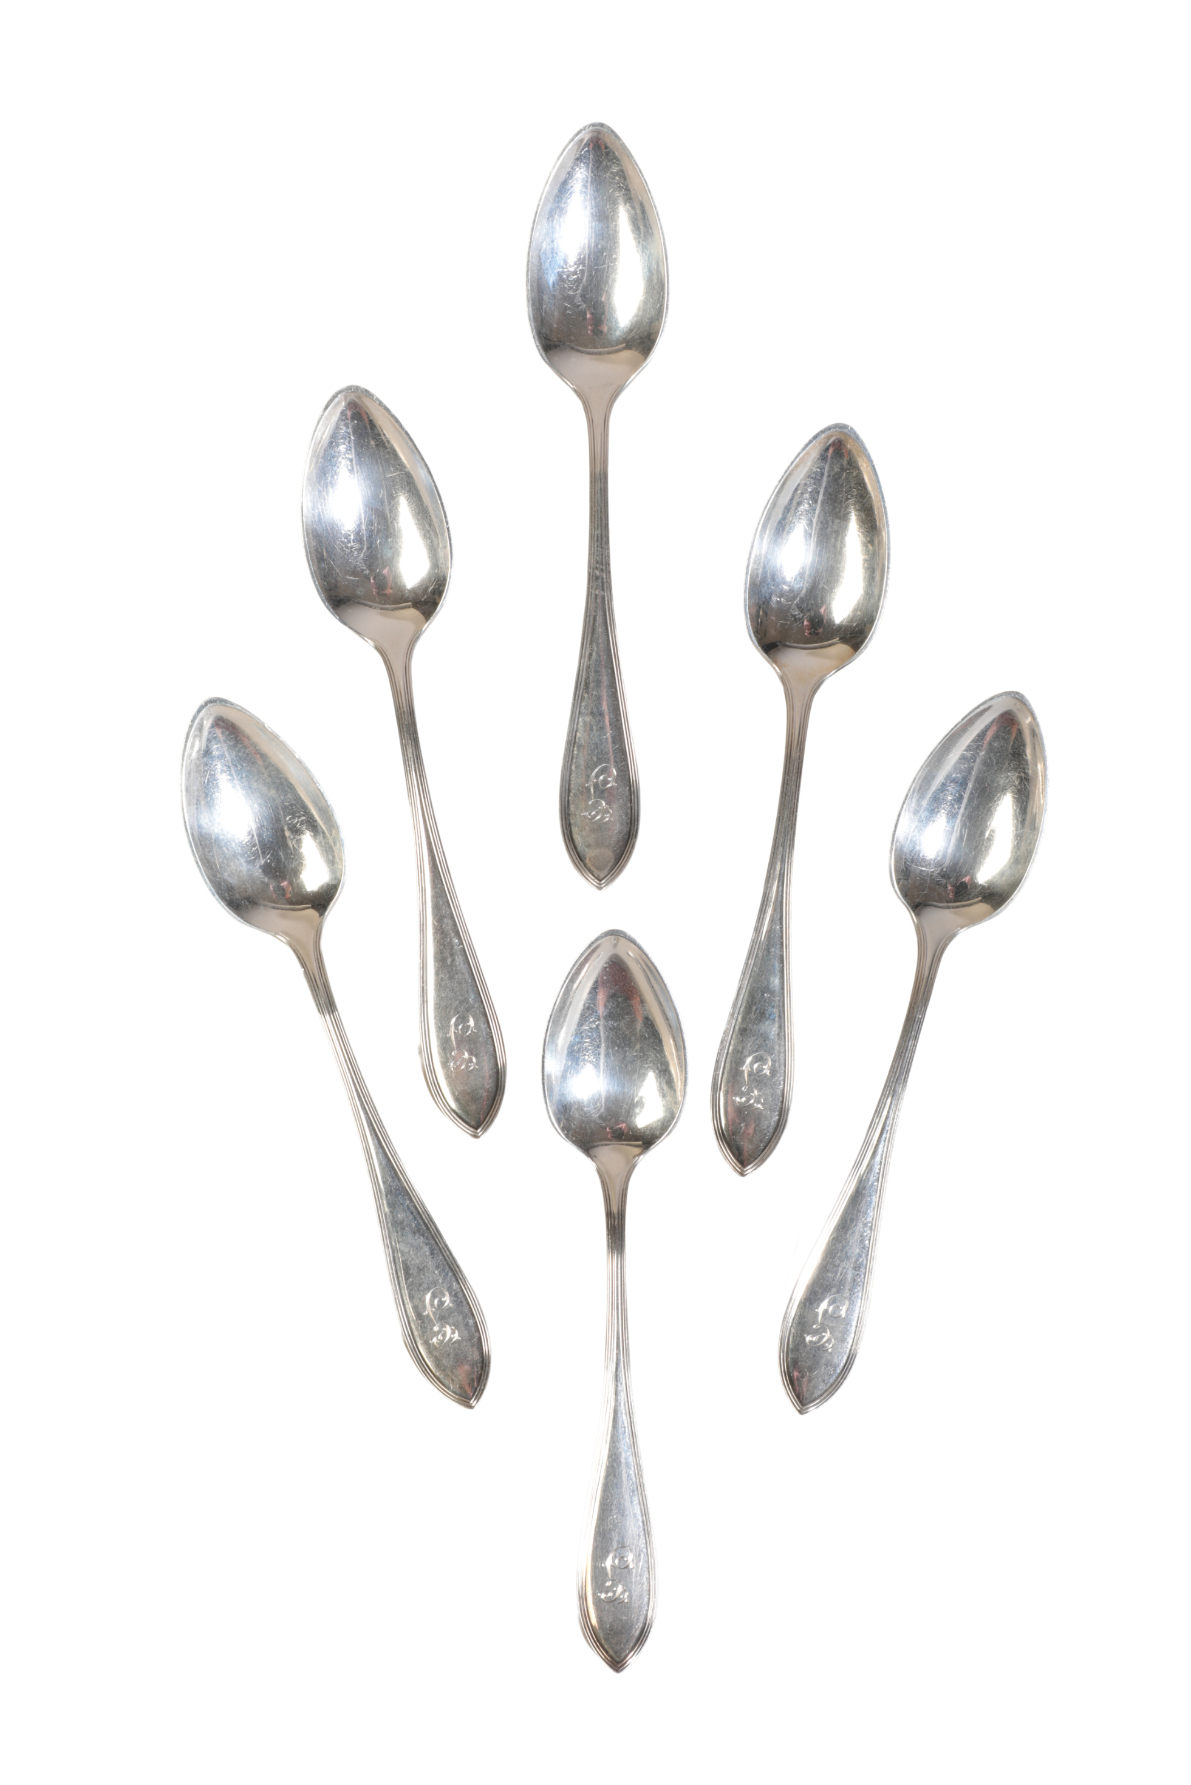 A SET OF SIX EARLY 20TH CENTURY AMERICAN STERLING SILVER SPOONS